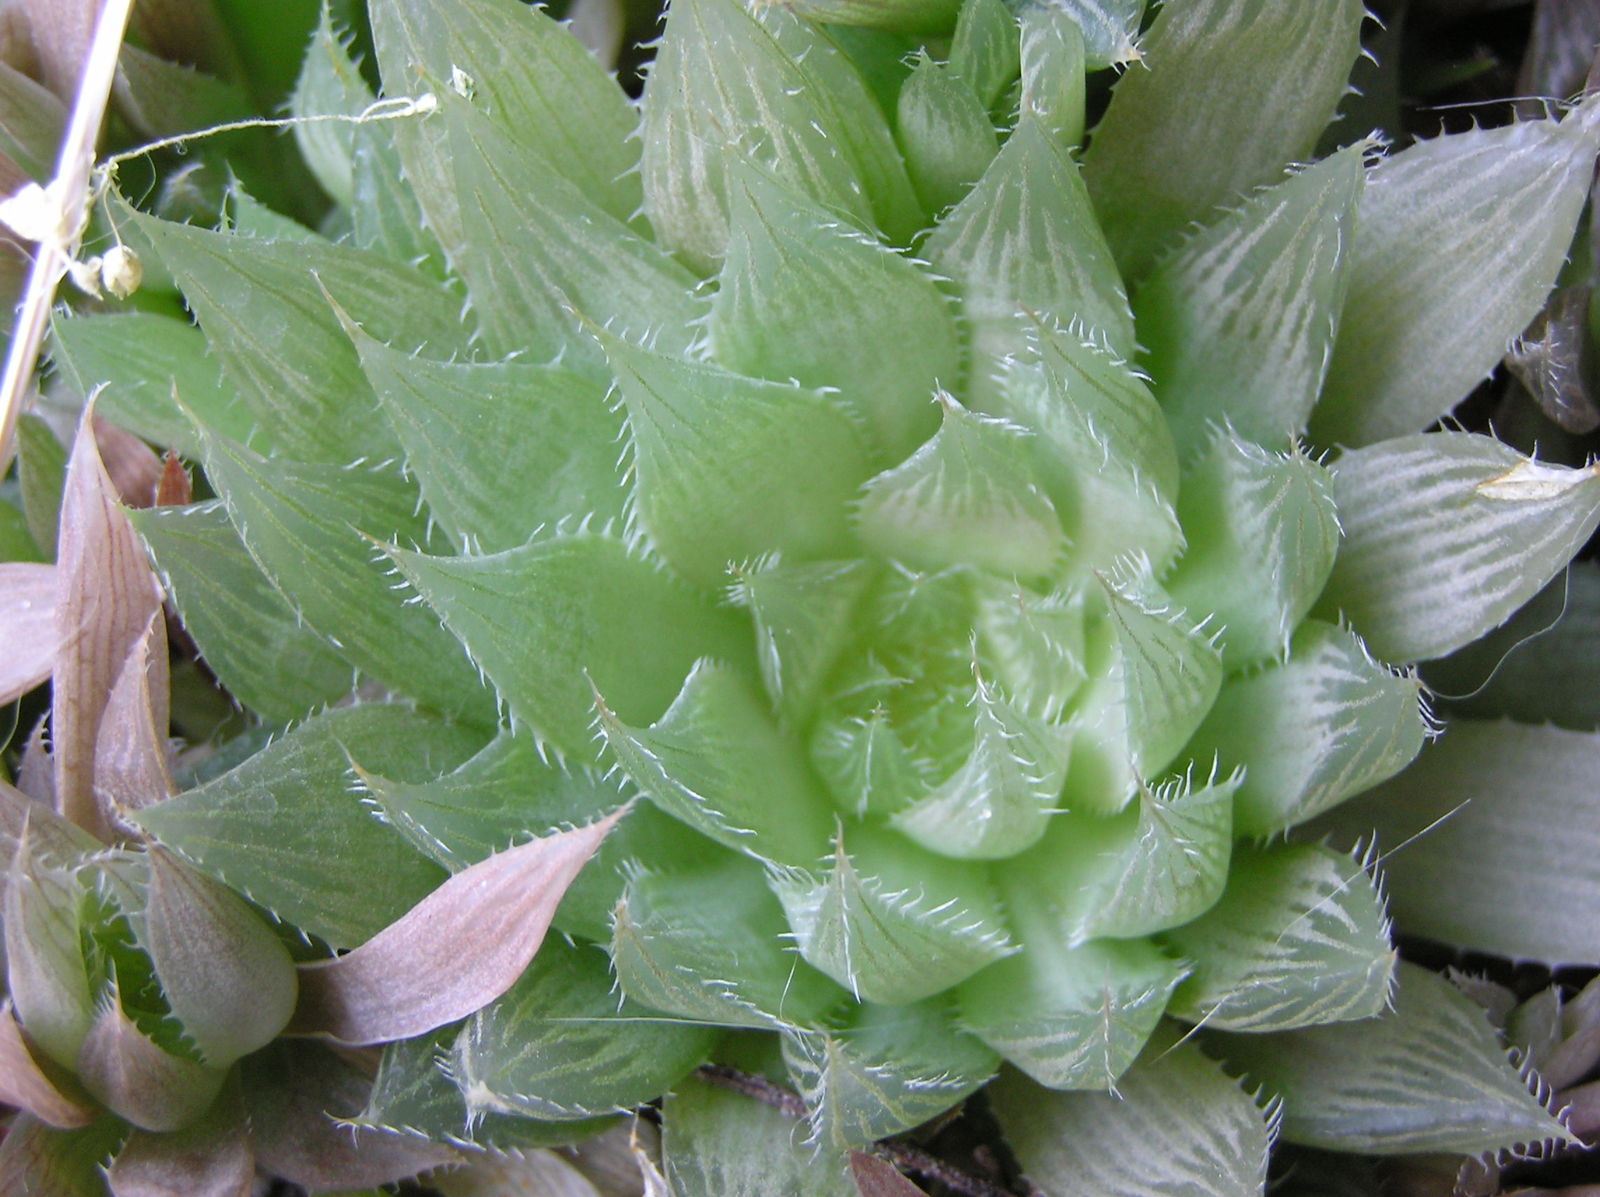 Haworthia Duval Plants Of The World Online Kew Science,Sous Vide Chicken Breast Temperature